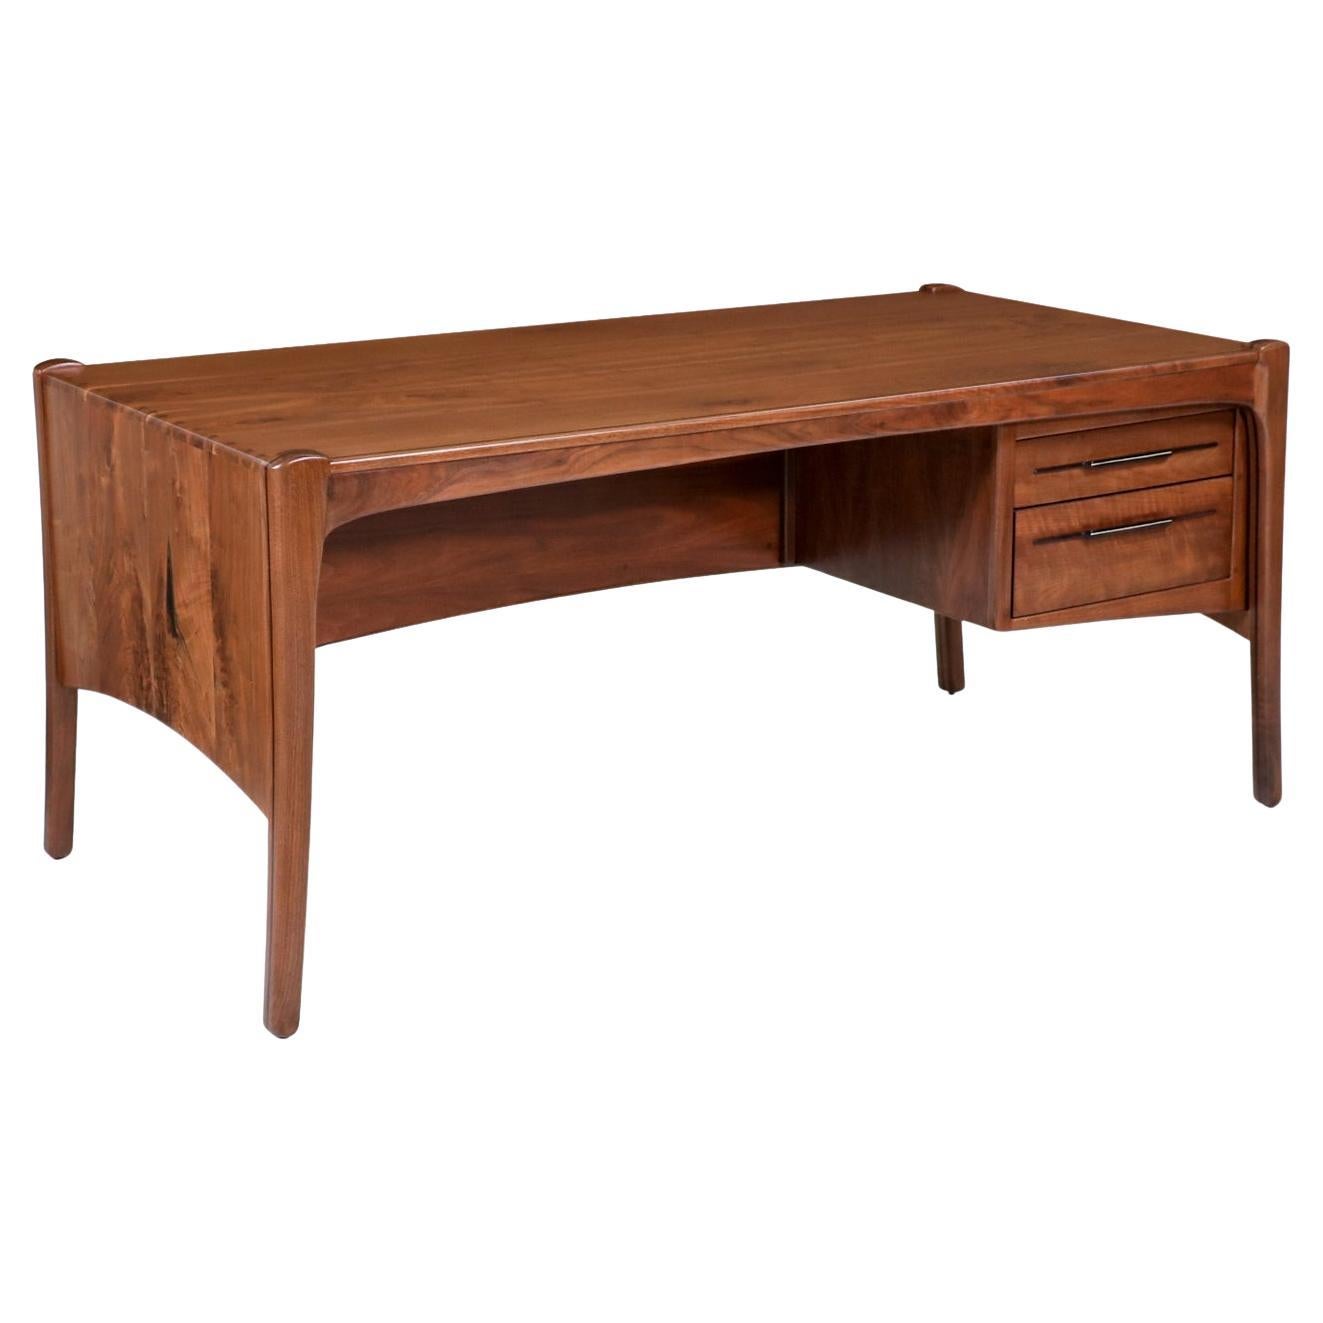 California Studio Sculpted Walnut Executive Desk by Anthony Khan For Sale